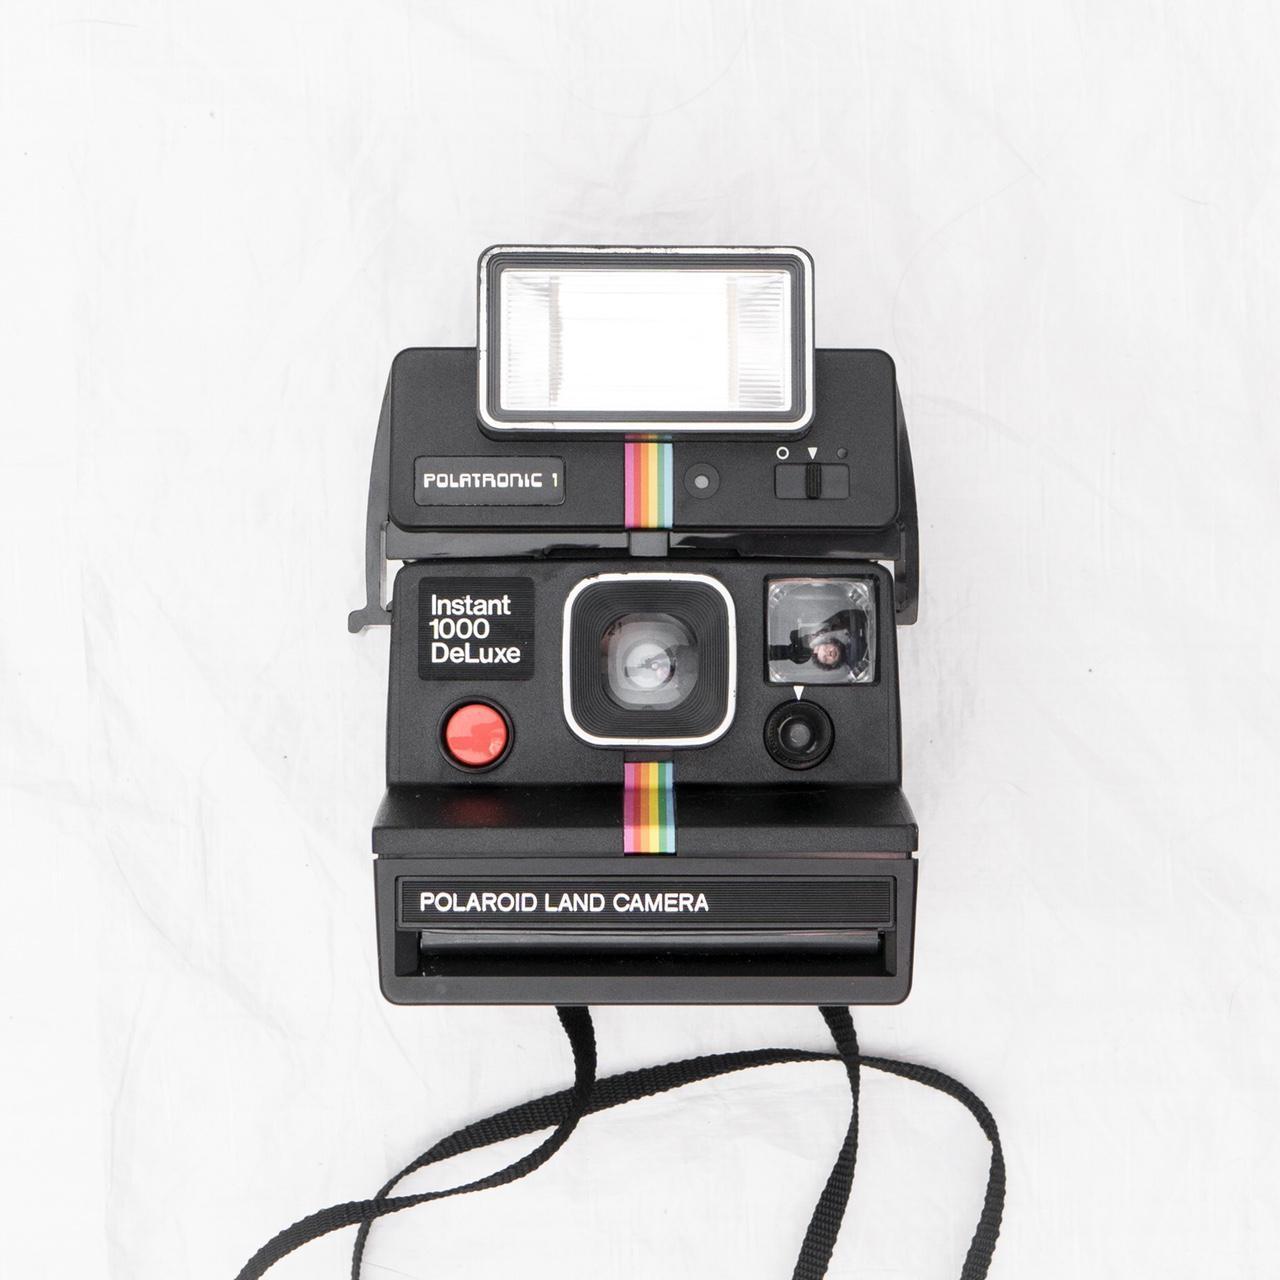 Product Image 1 - Polaroid Instant 1000 DeLuxe with